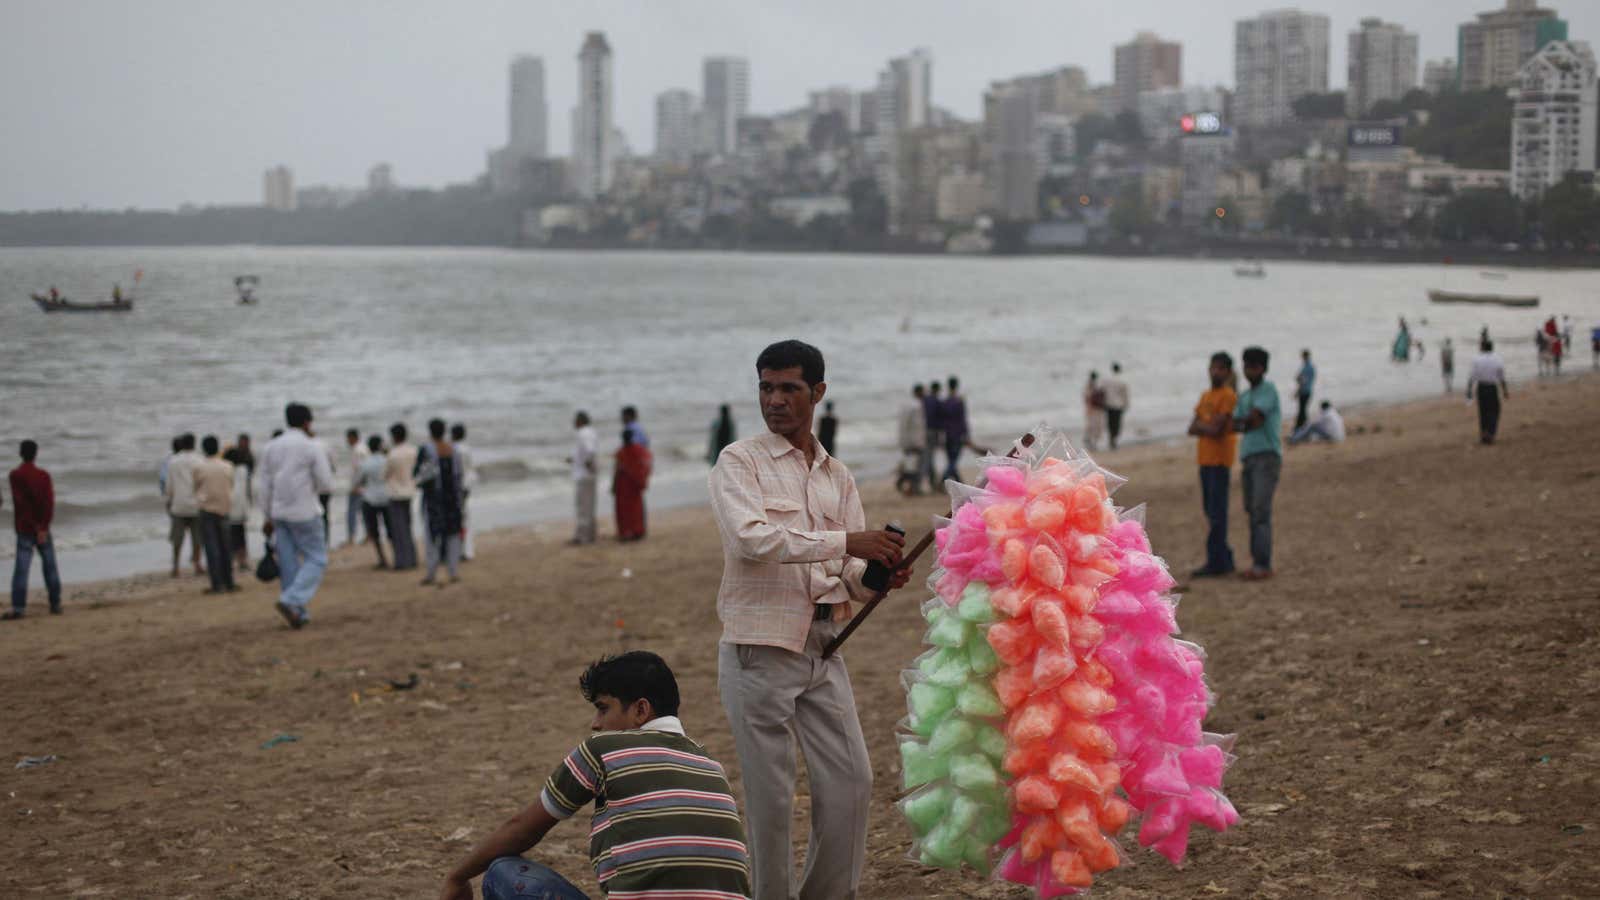 A lot of the voters in Mumbai just went to the beach instead.